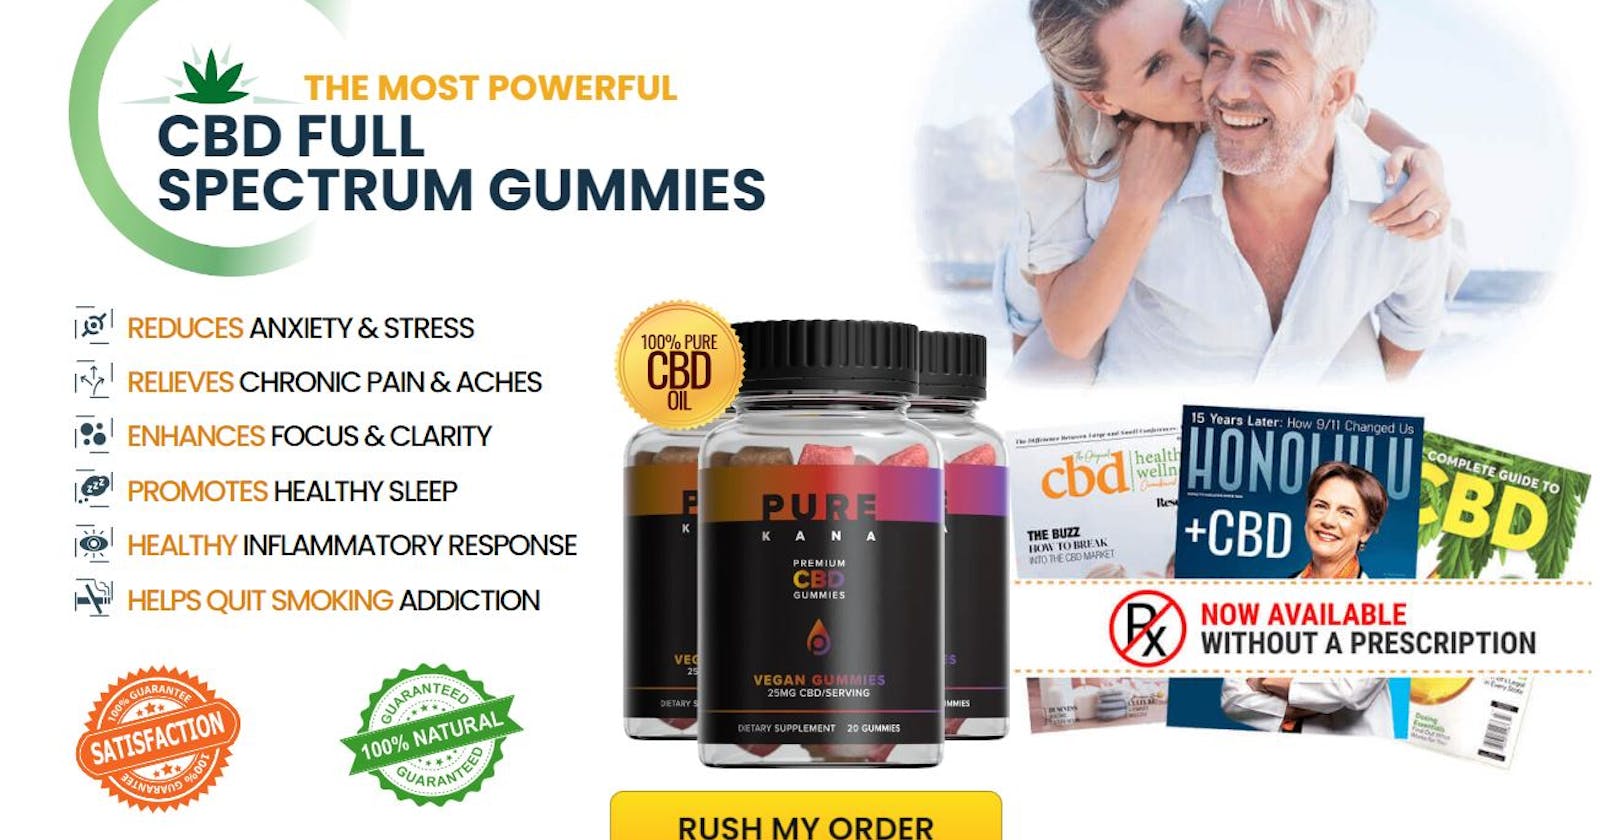 Canna Labs CBD Gummies {Customer Demanded Shocking Review} [Cannabinoid Anxiety, Stress relief Benefits] - Is Truth or Myth Science?